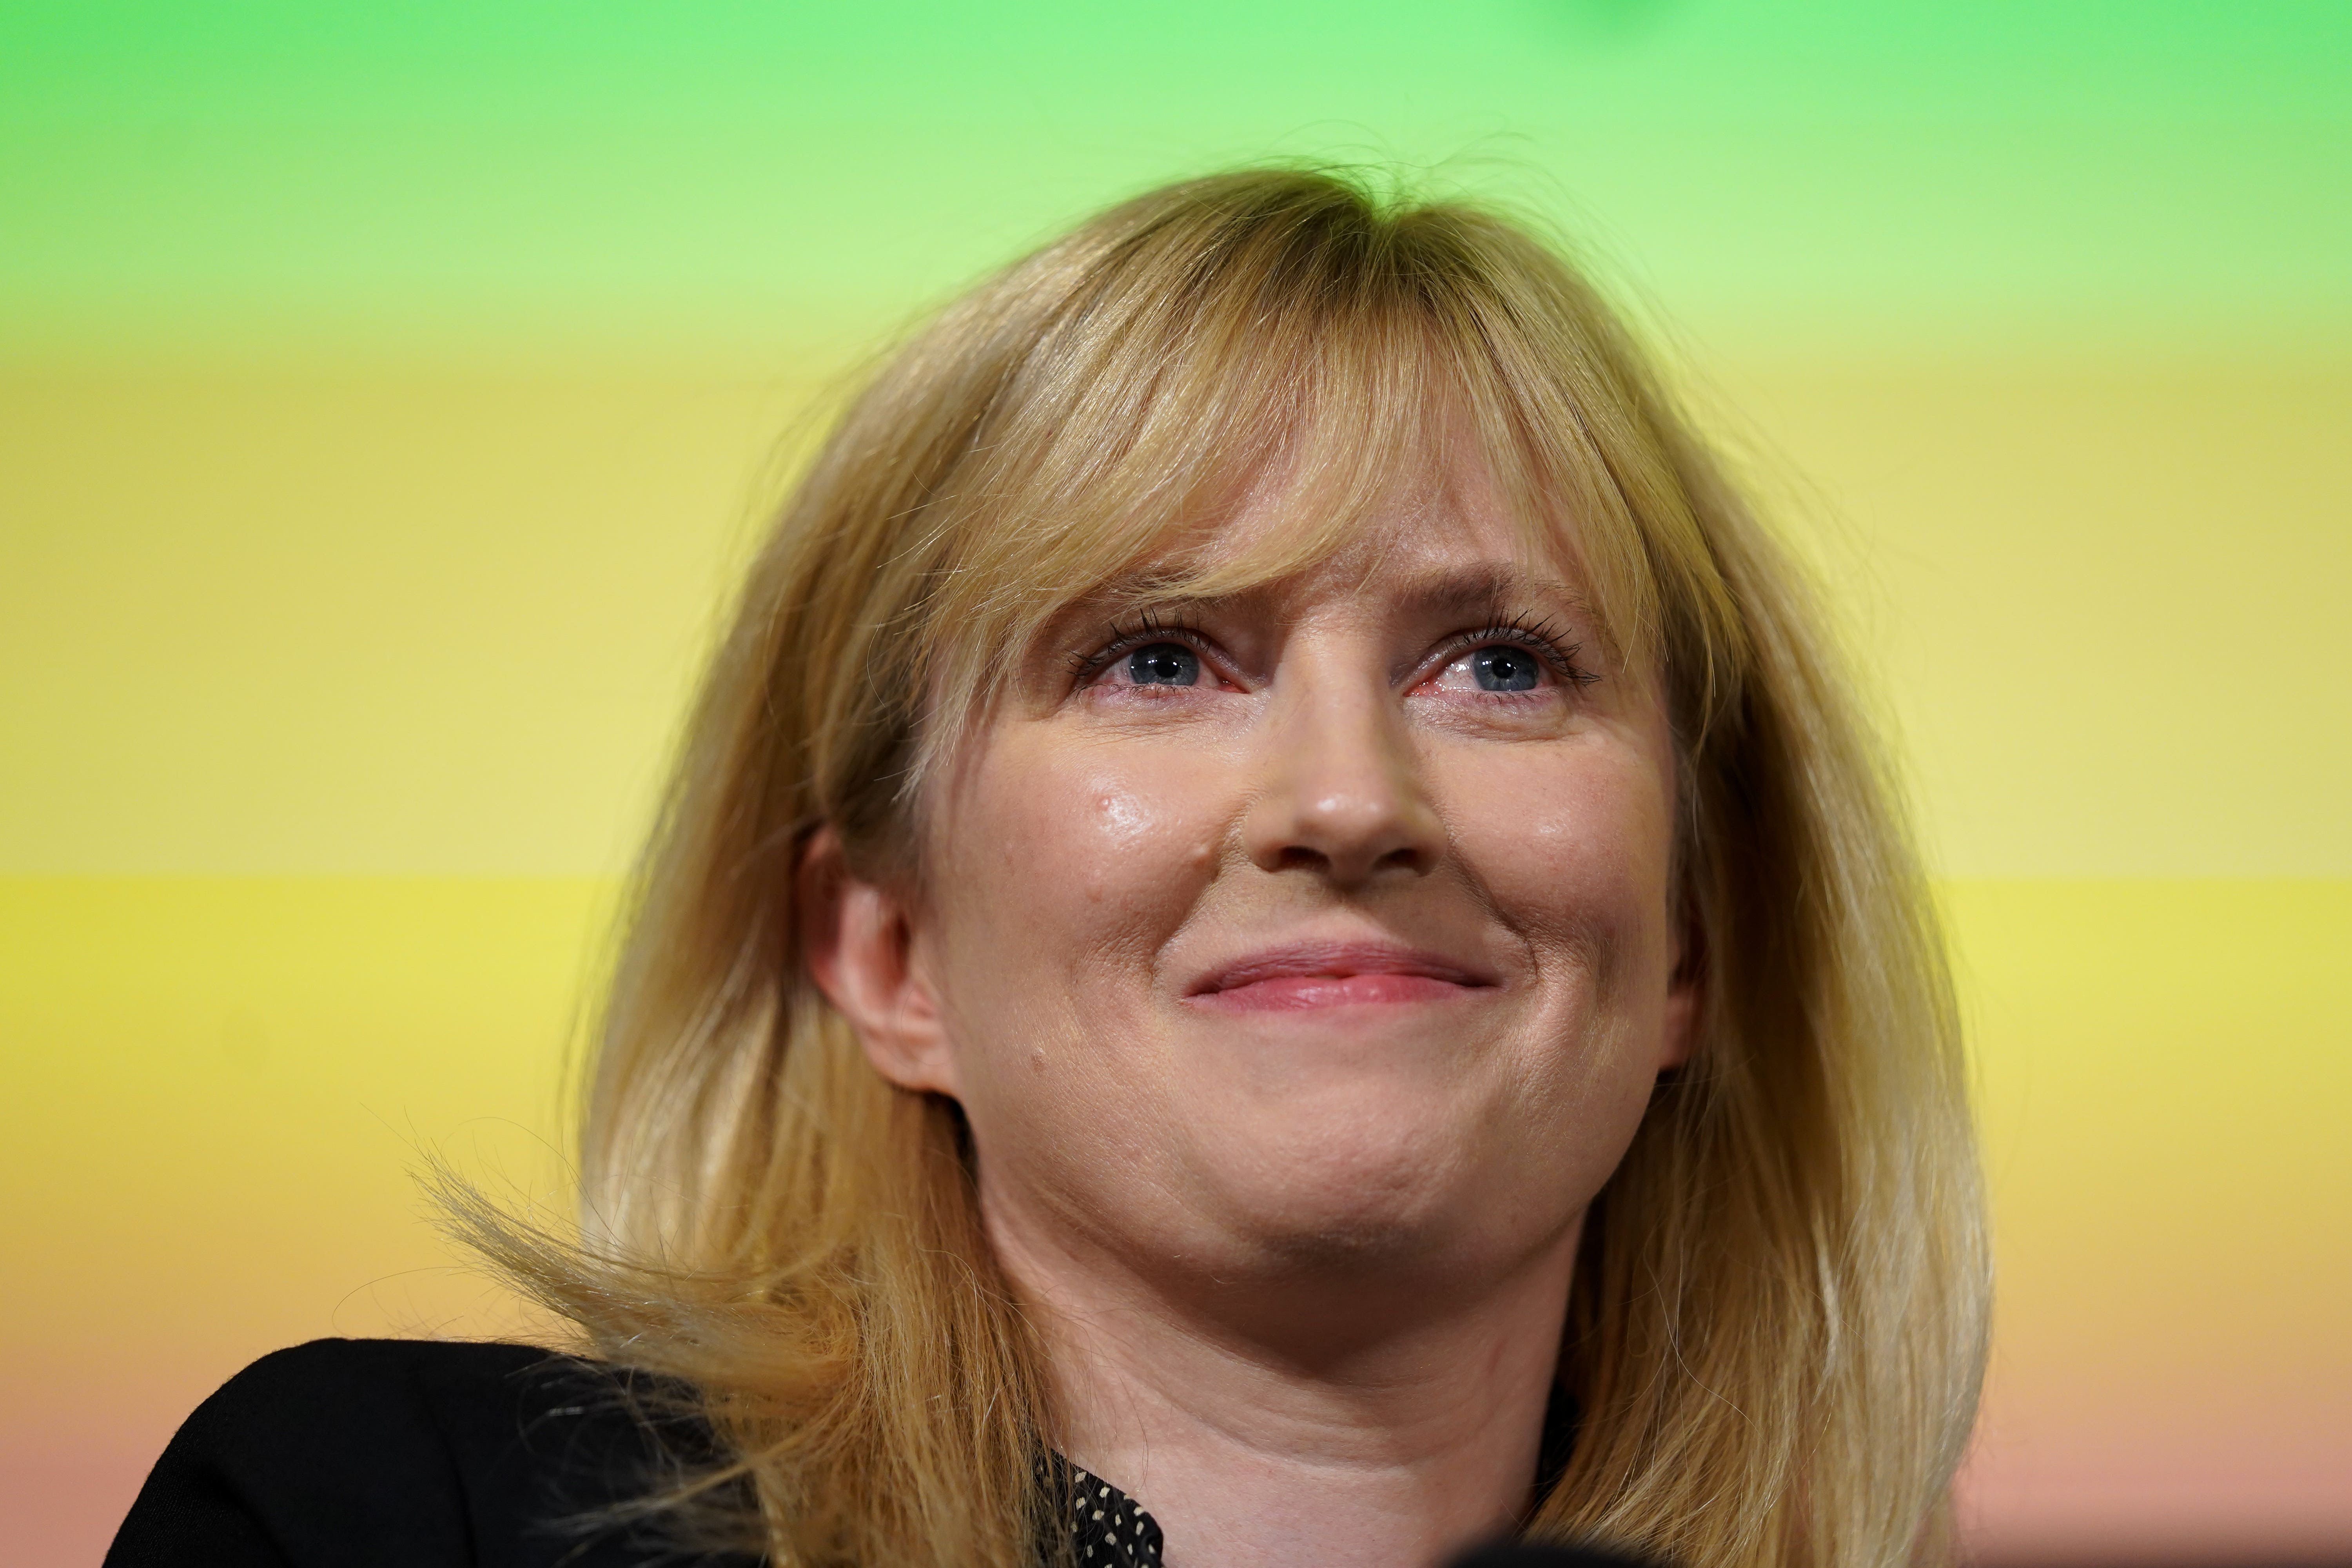 Rosie Duffield, MP for Canterbury, had been under investigation since last year